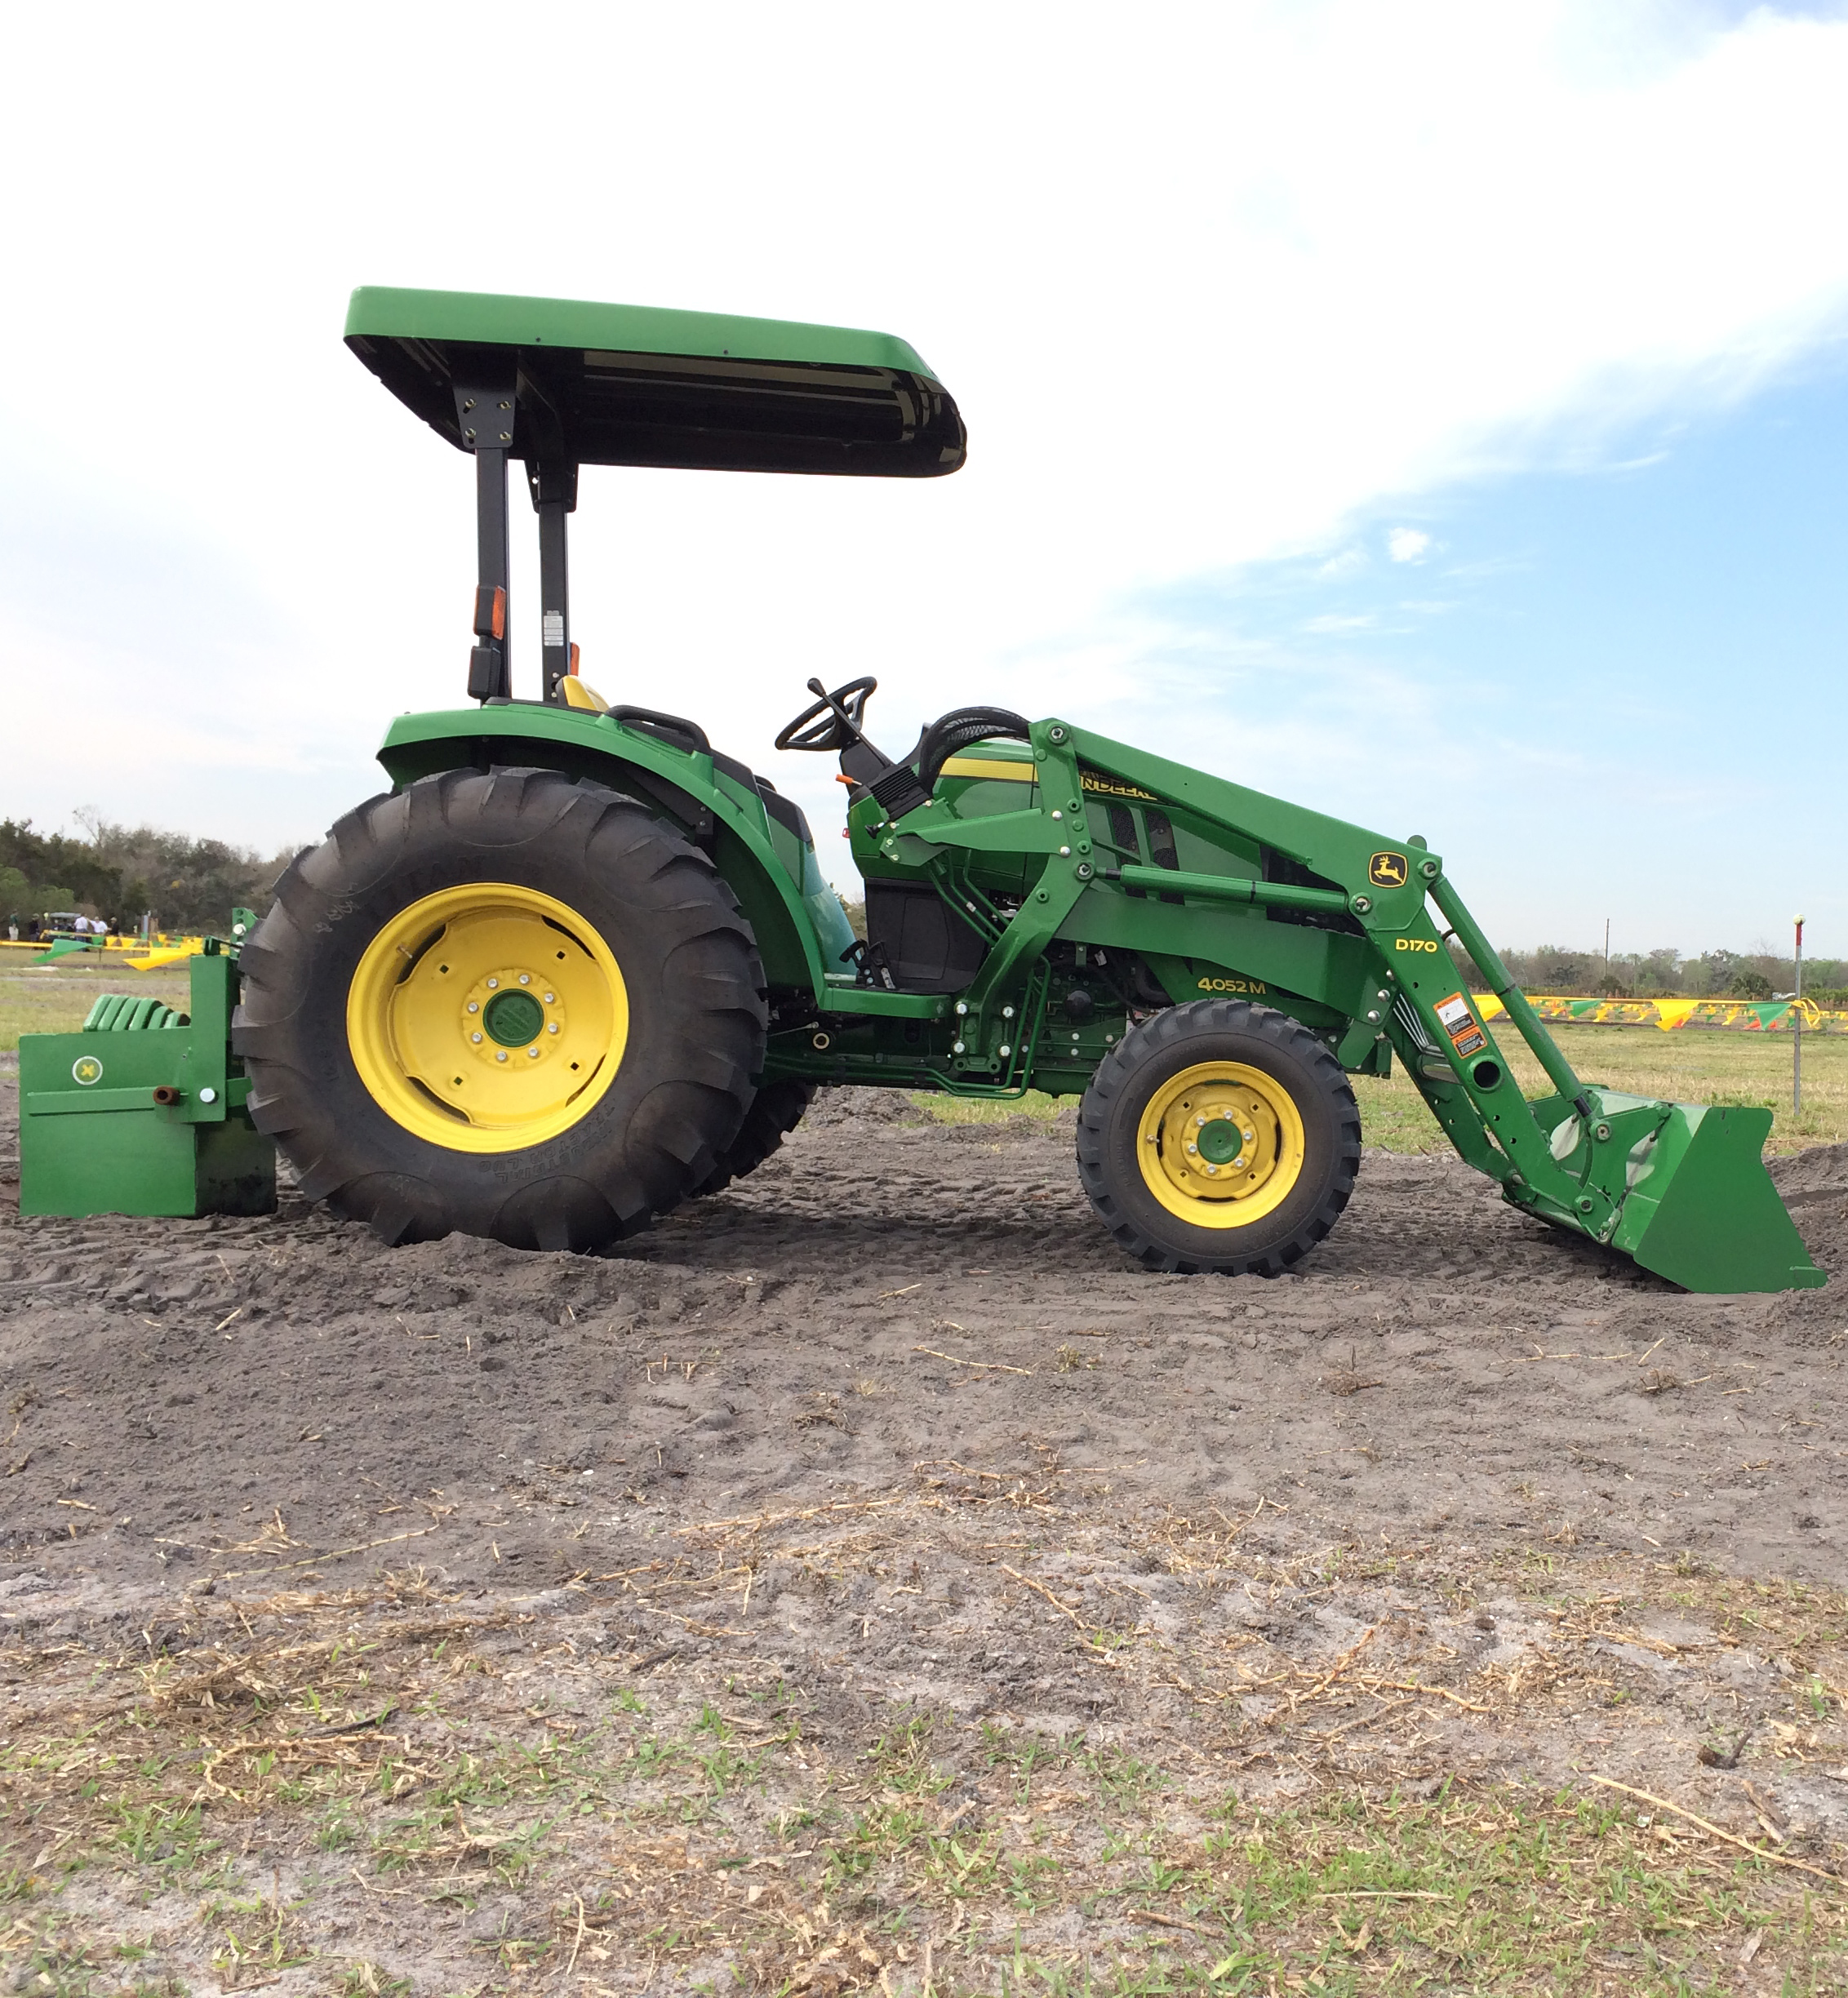 John Deere’s 4052M, as well as 5 other 4 Family models, will be ...